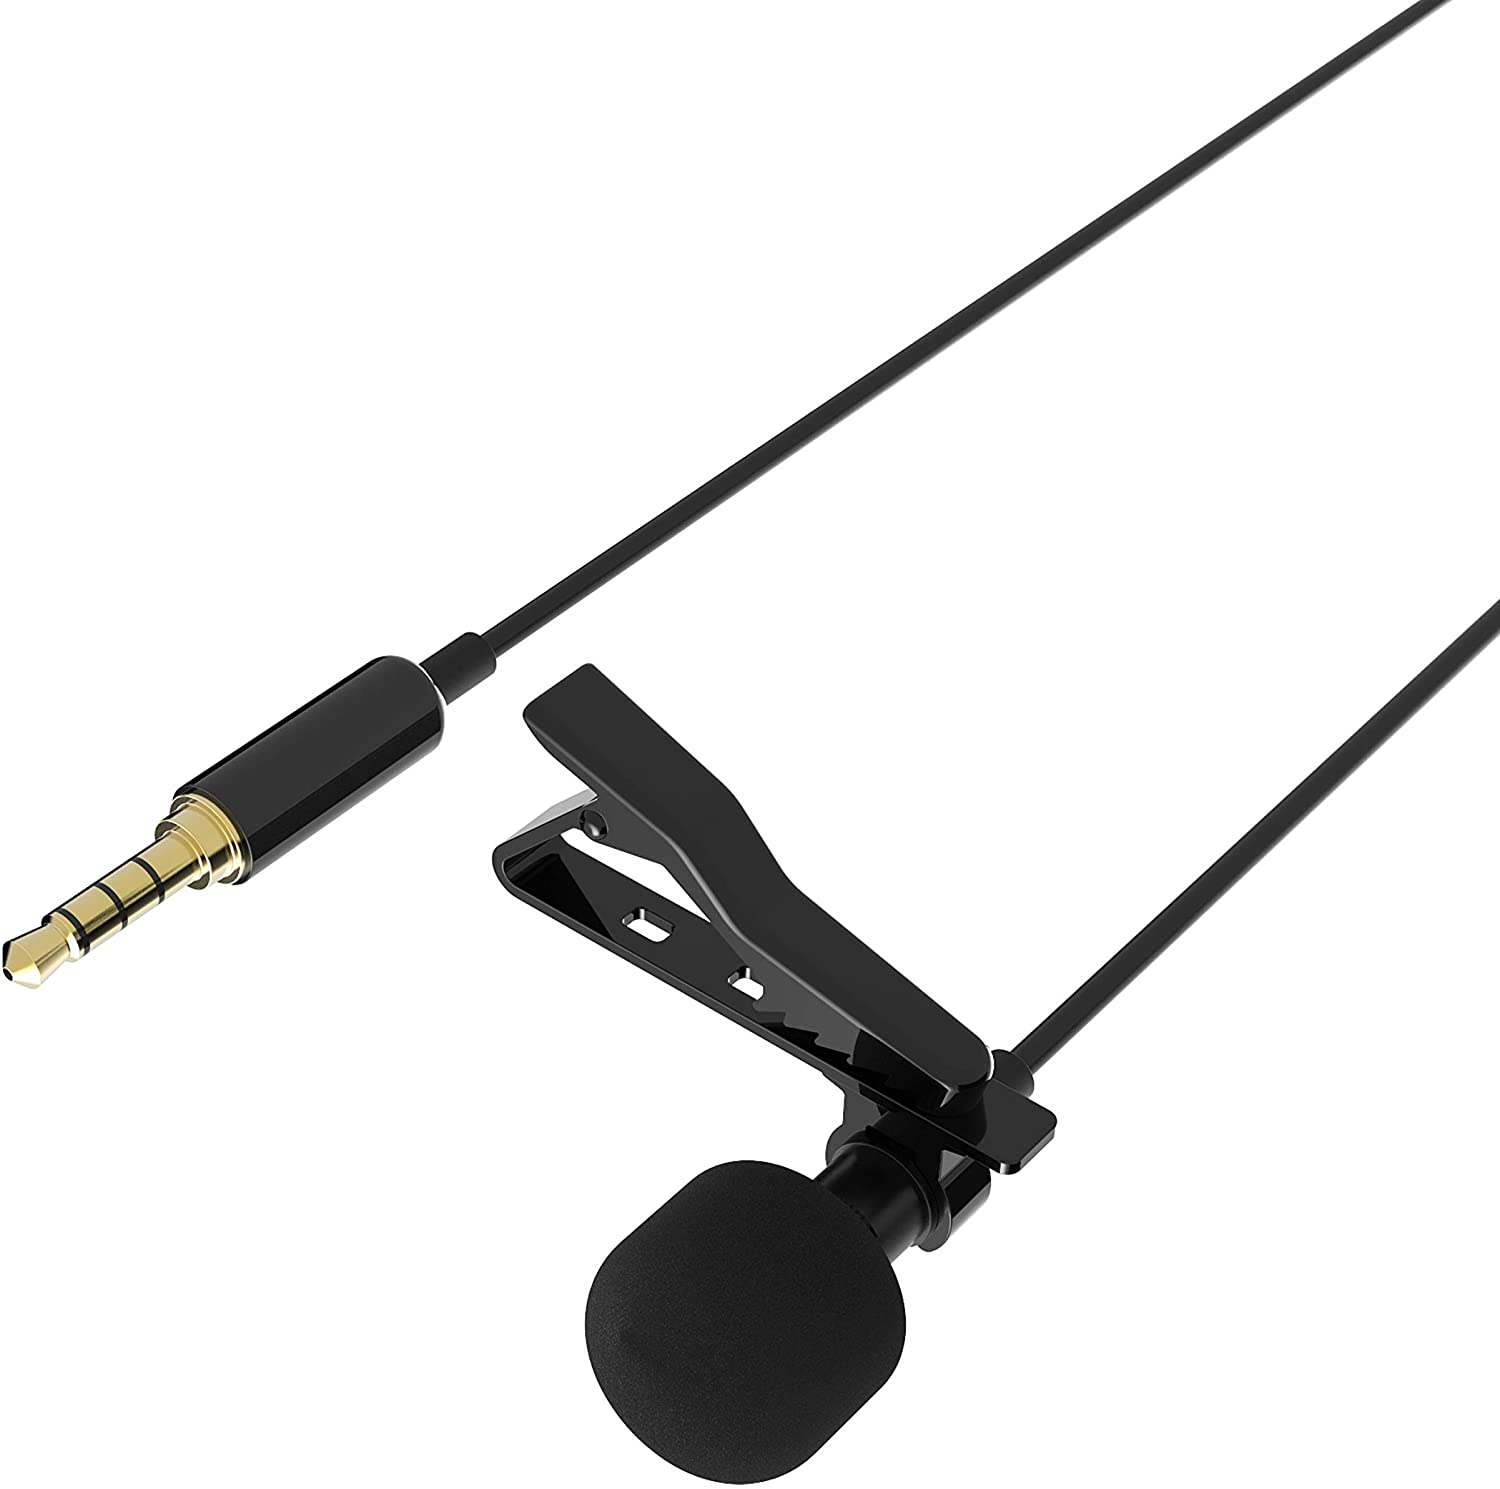 SABRENT Lavalier/Lapel Clip on Omnidirectional Condenser Microphone for iPhone & Android Smartphones or Any Other Mobile Device (AU-SMCR)